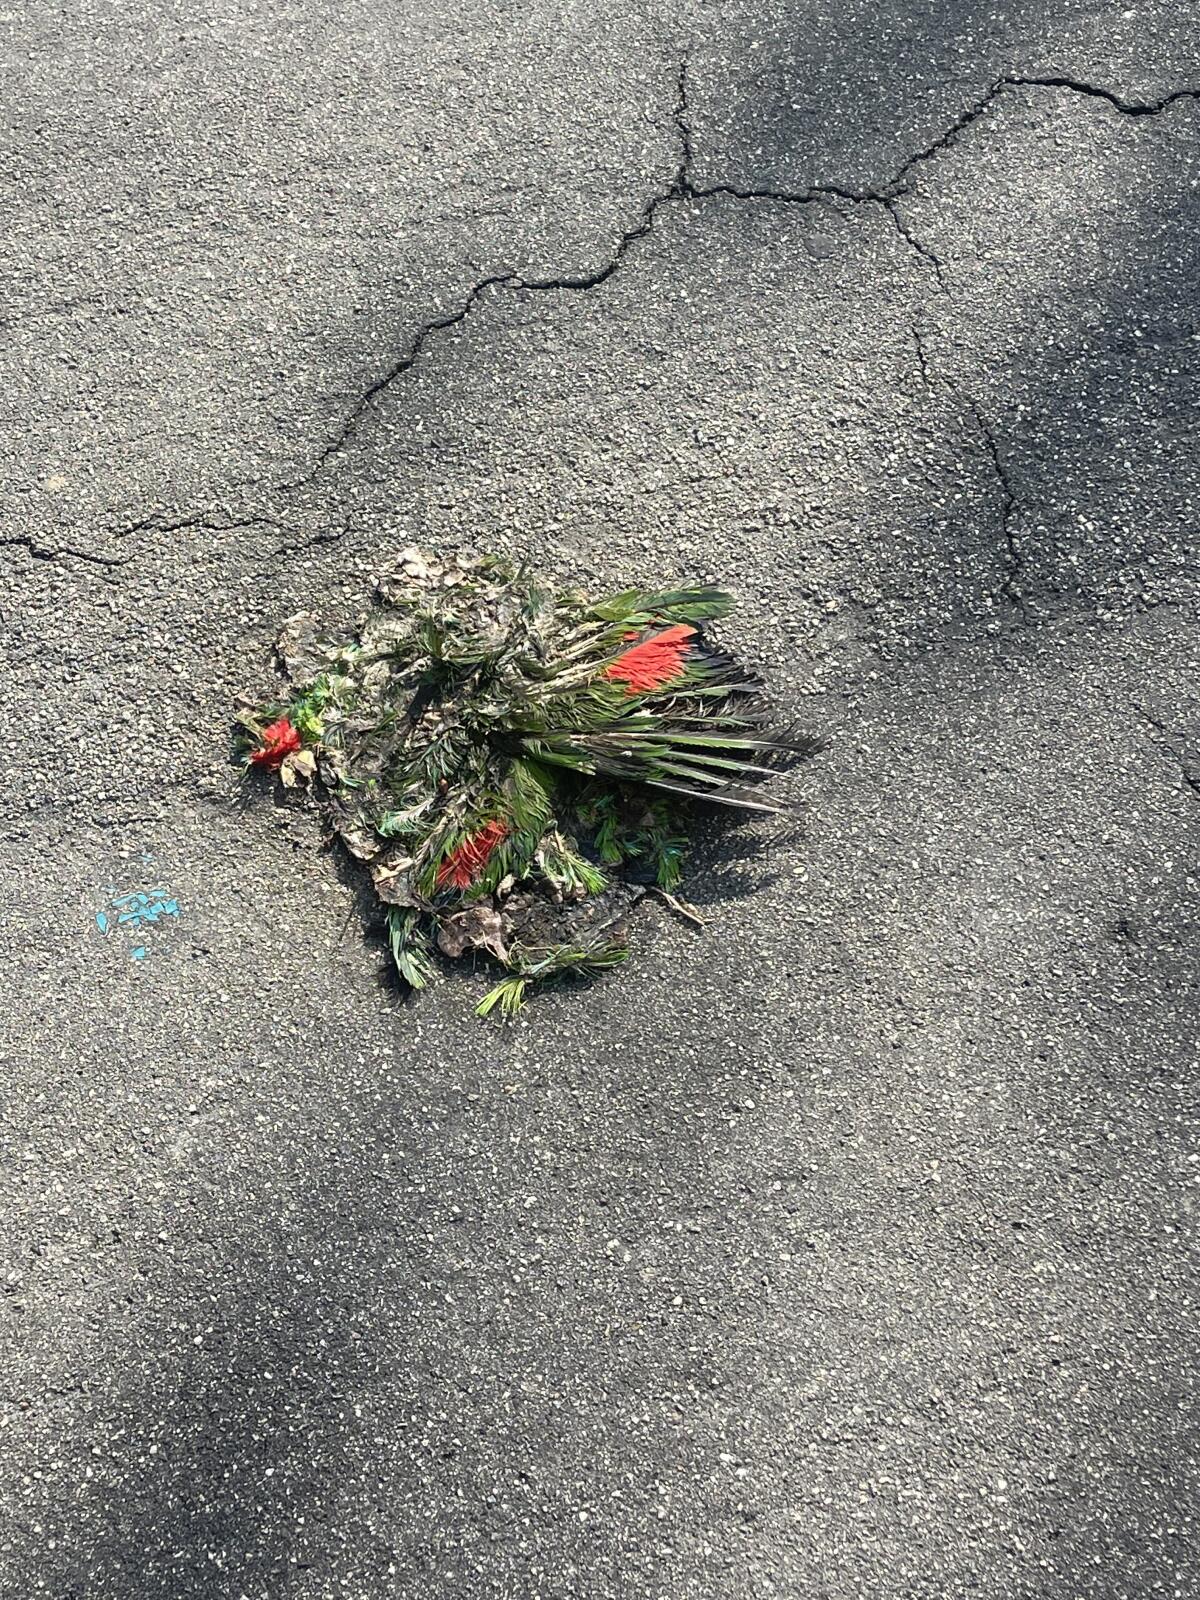 A red-crowned amazon is found smashed in a Temple City mini mall parking. A man was filmed illegally trapping parrots nearby.